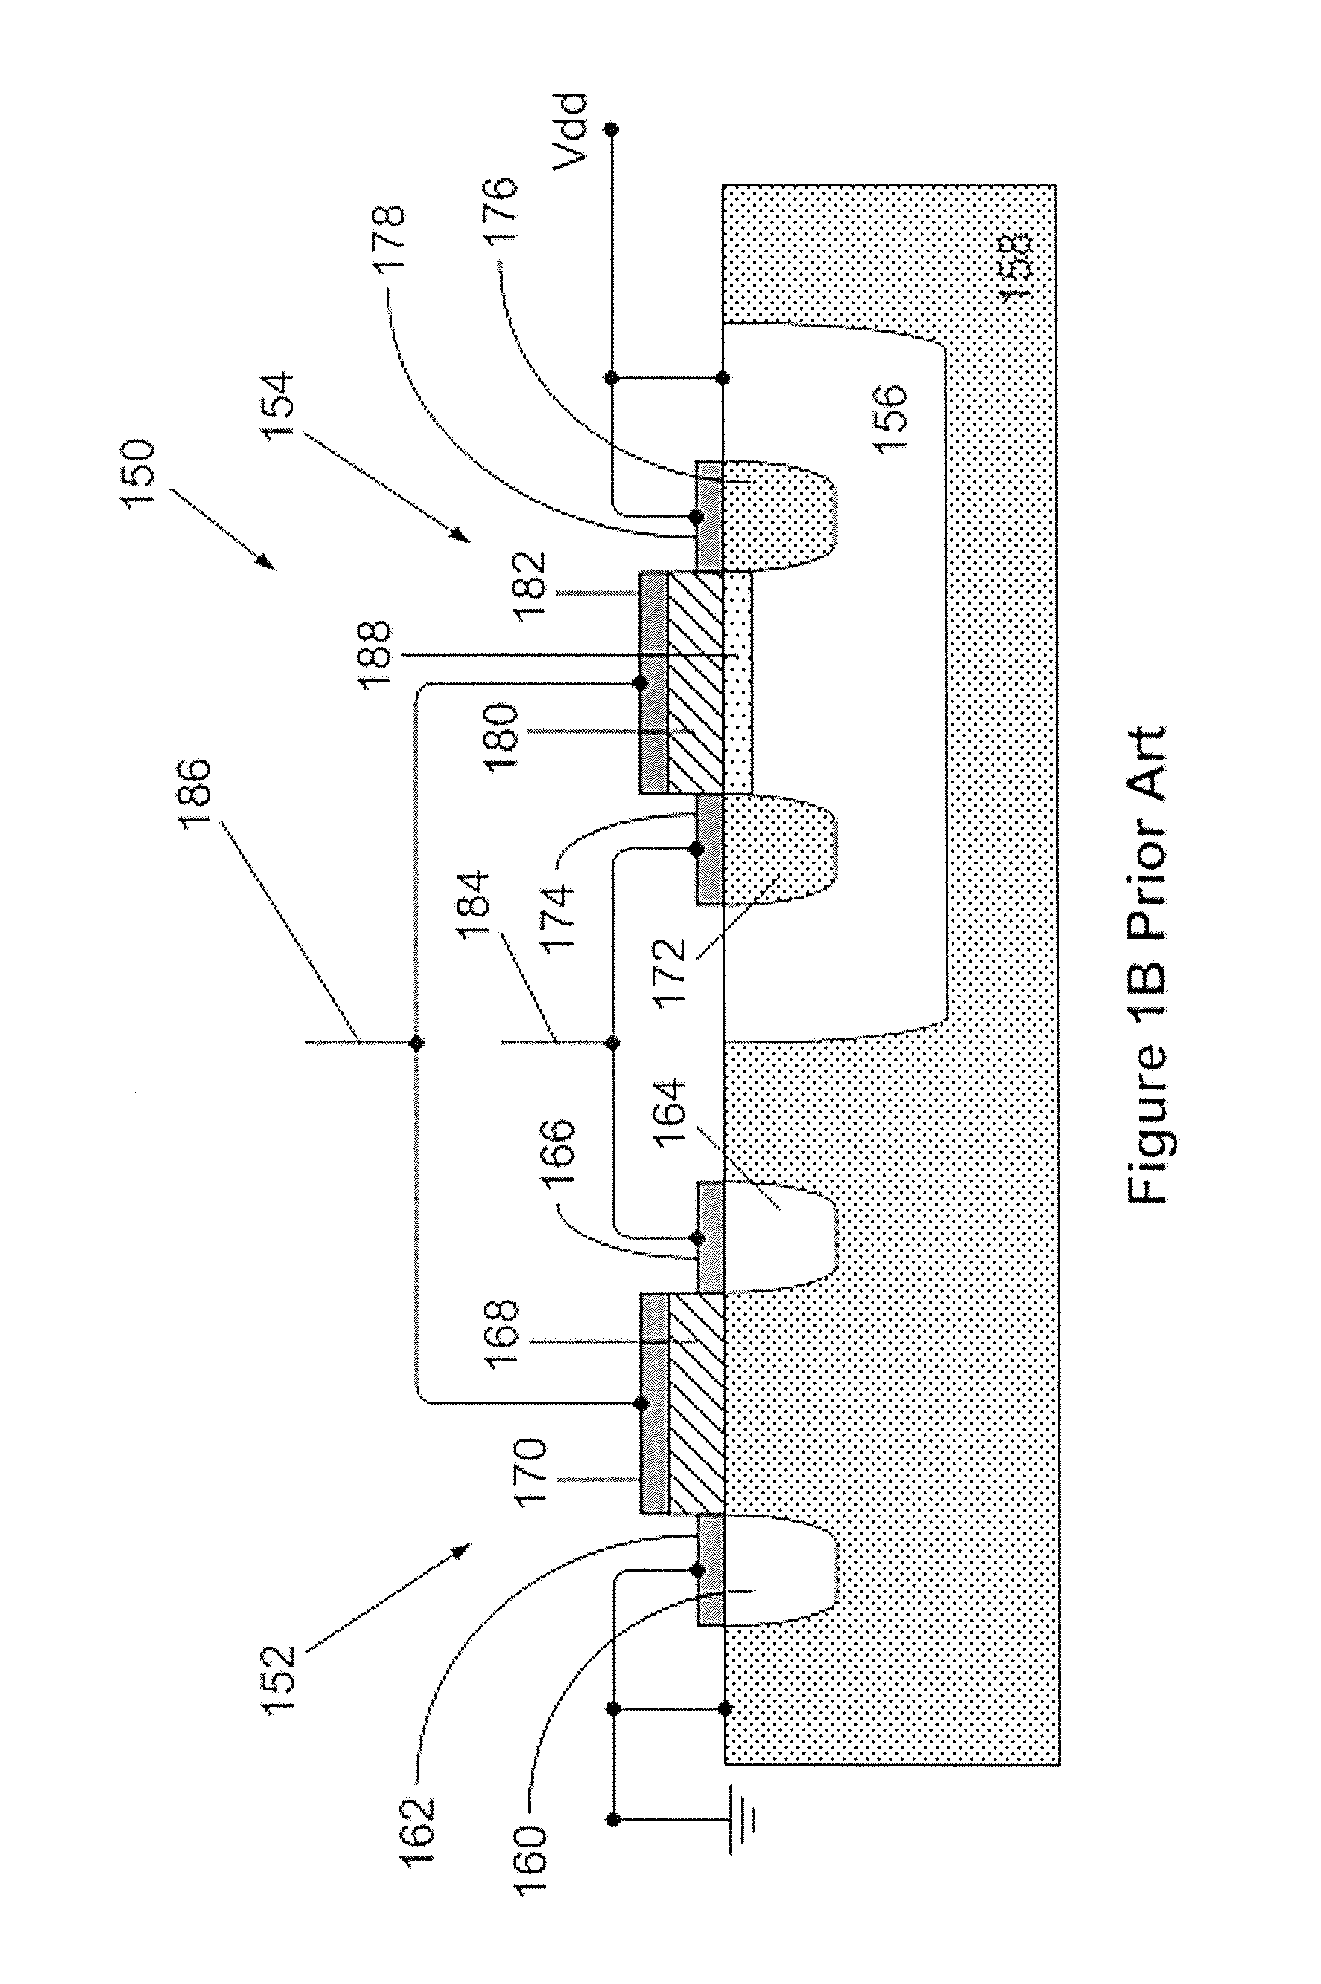 Logic Elements Comprising Carbon Nanotube Field Effect Transistor (CNTFET) Devices and Methods of Making Same